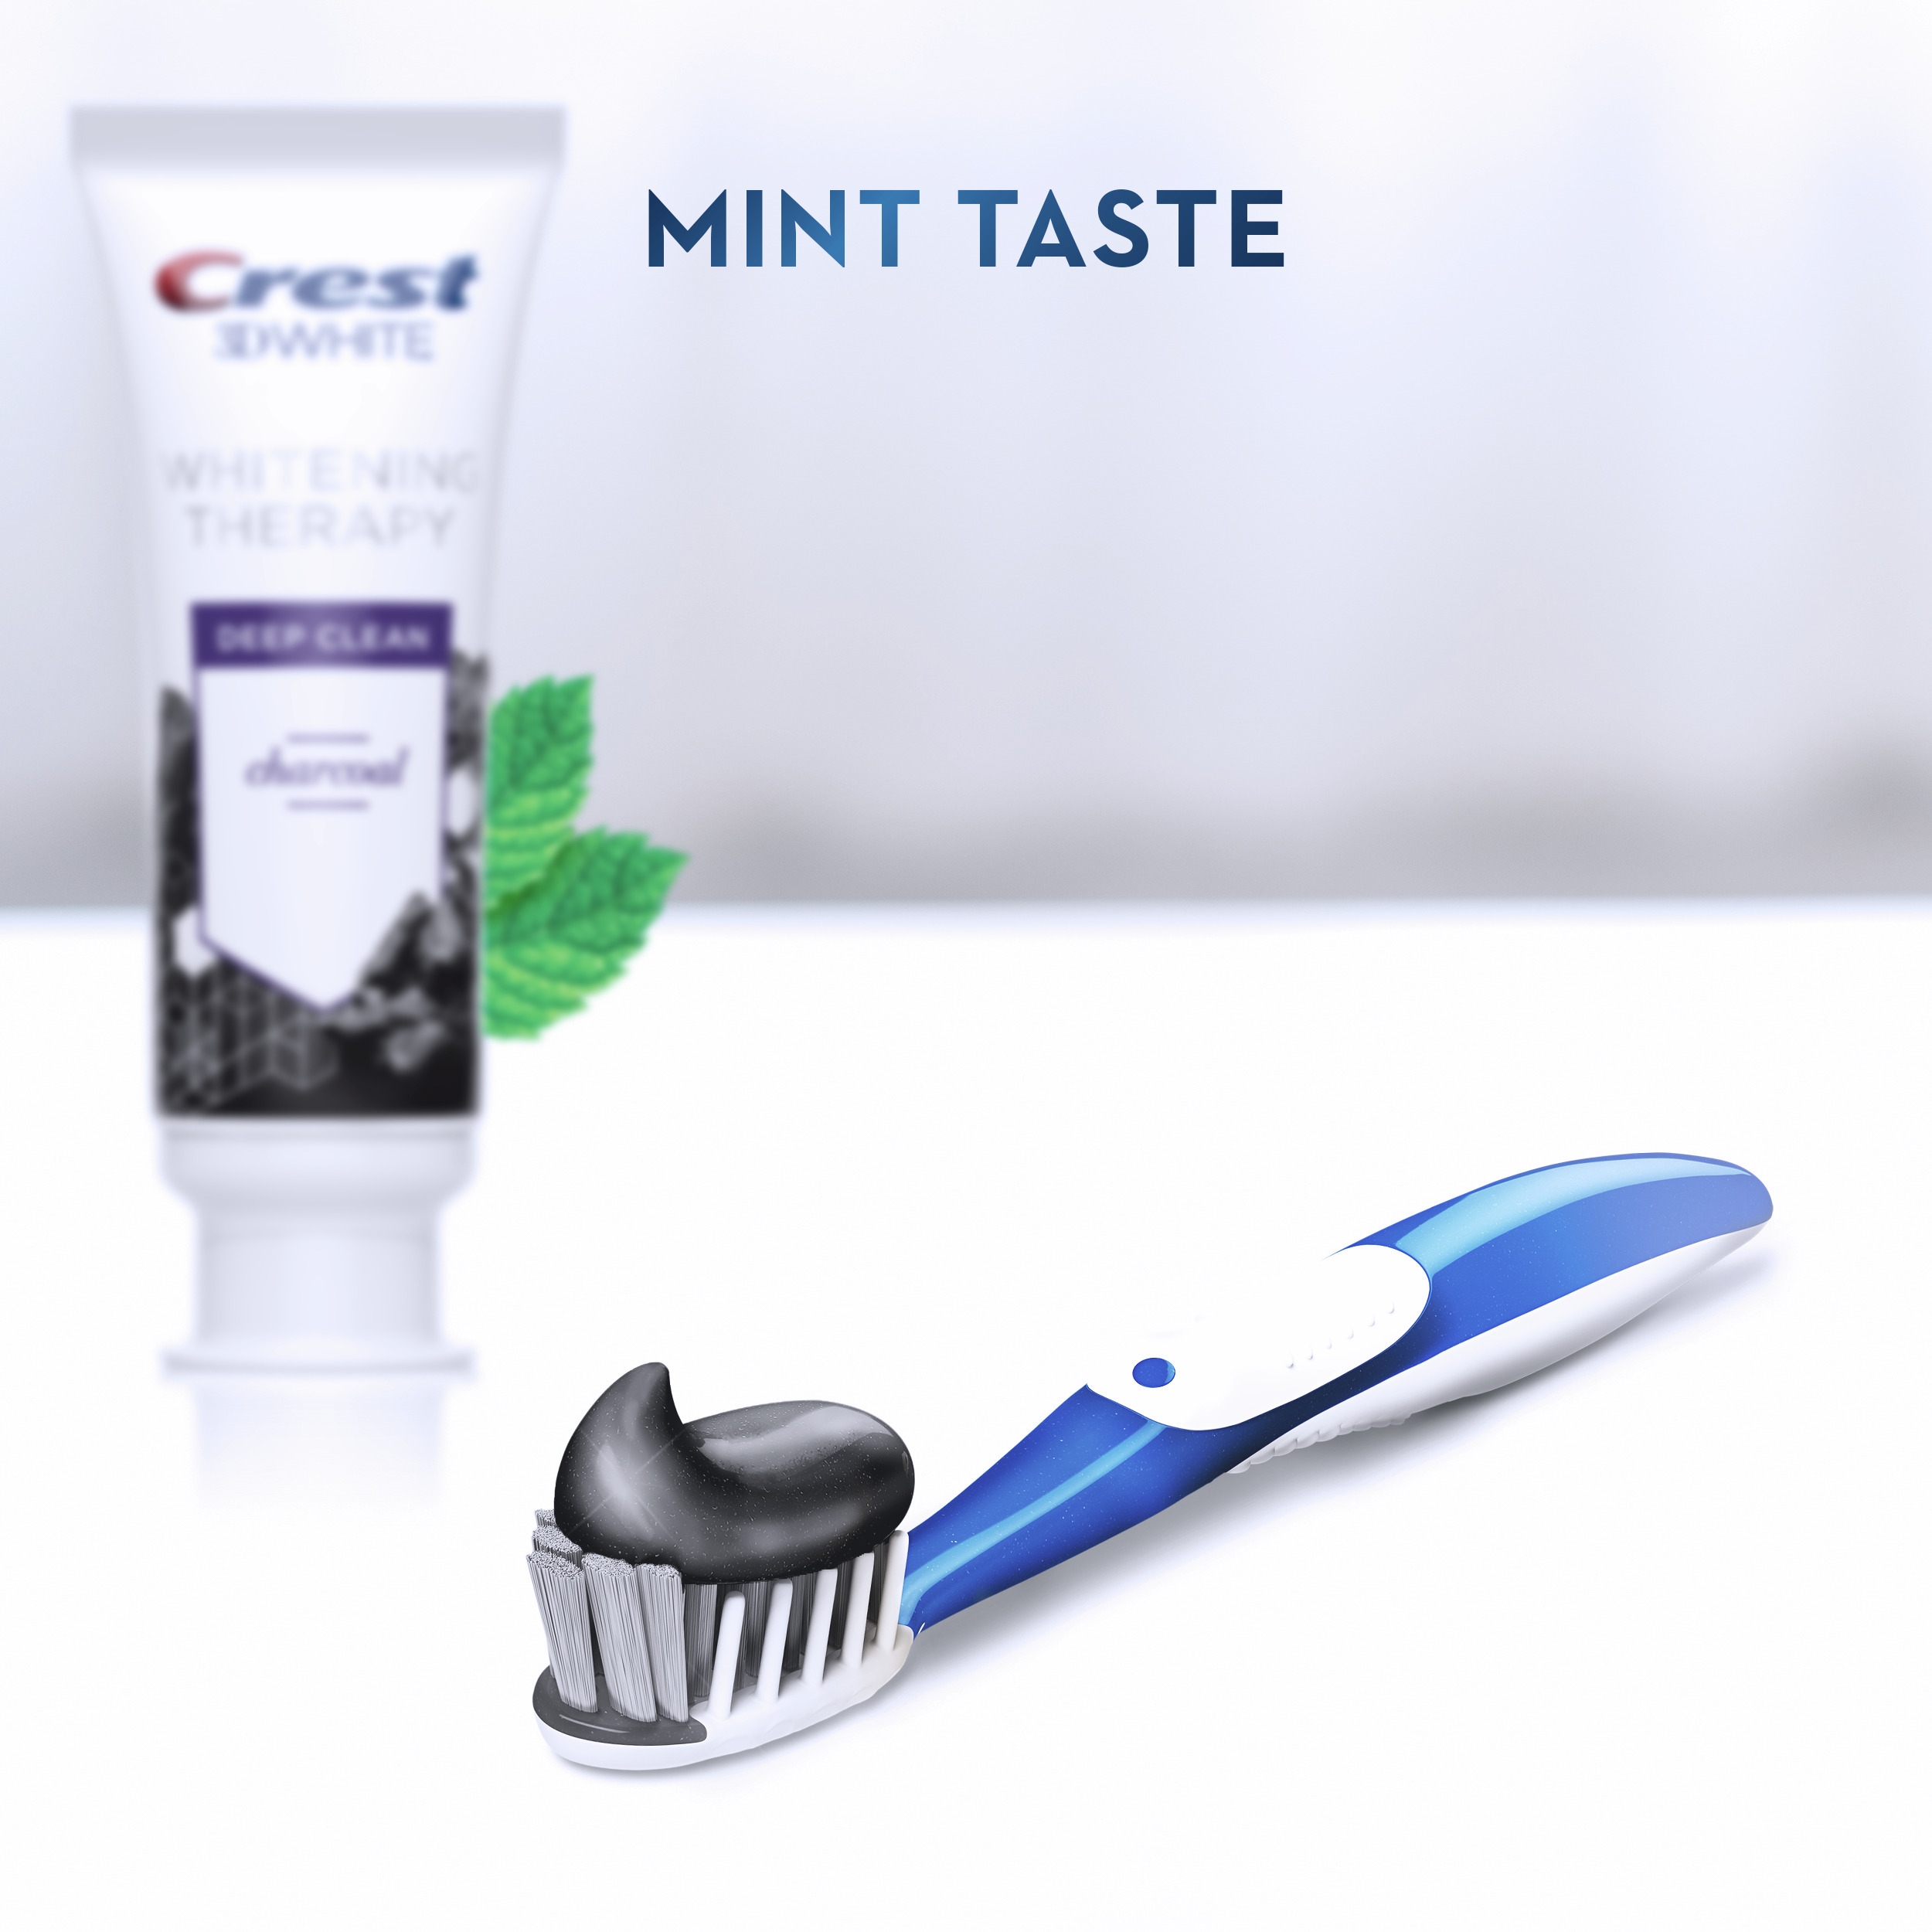 Crest 3D White Whitening Therapy Charcoal Deep Clean Toothpaste, Mint, 4.1 oz - image 4 of 11